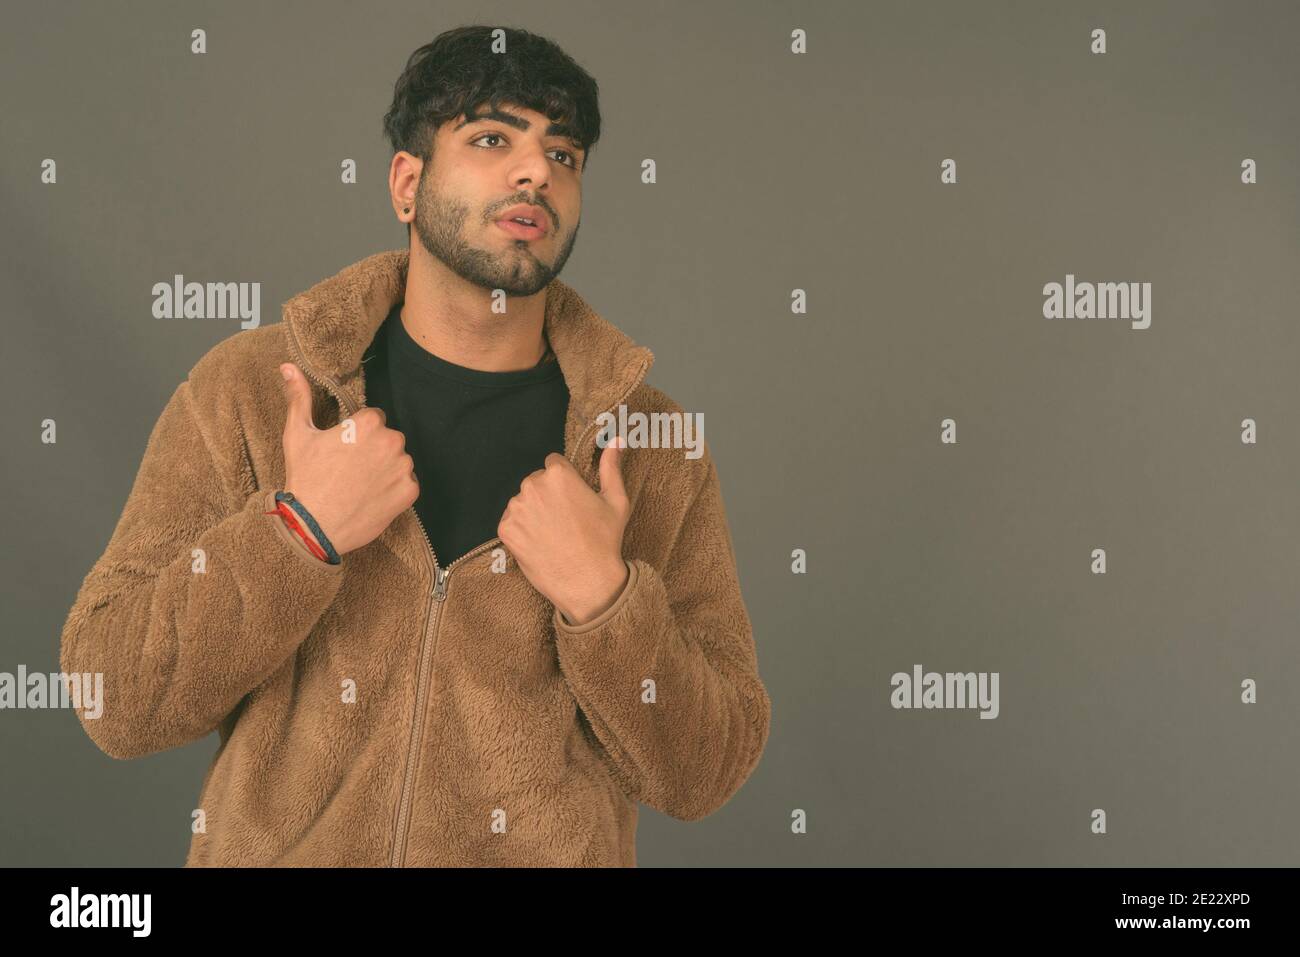 Young handsome Indian man against gray background Stock Photo